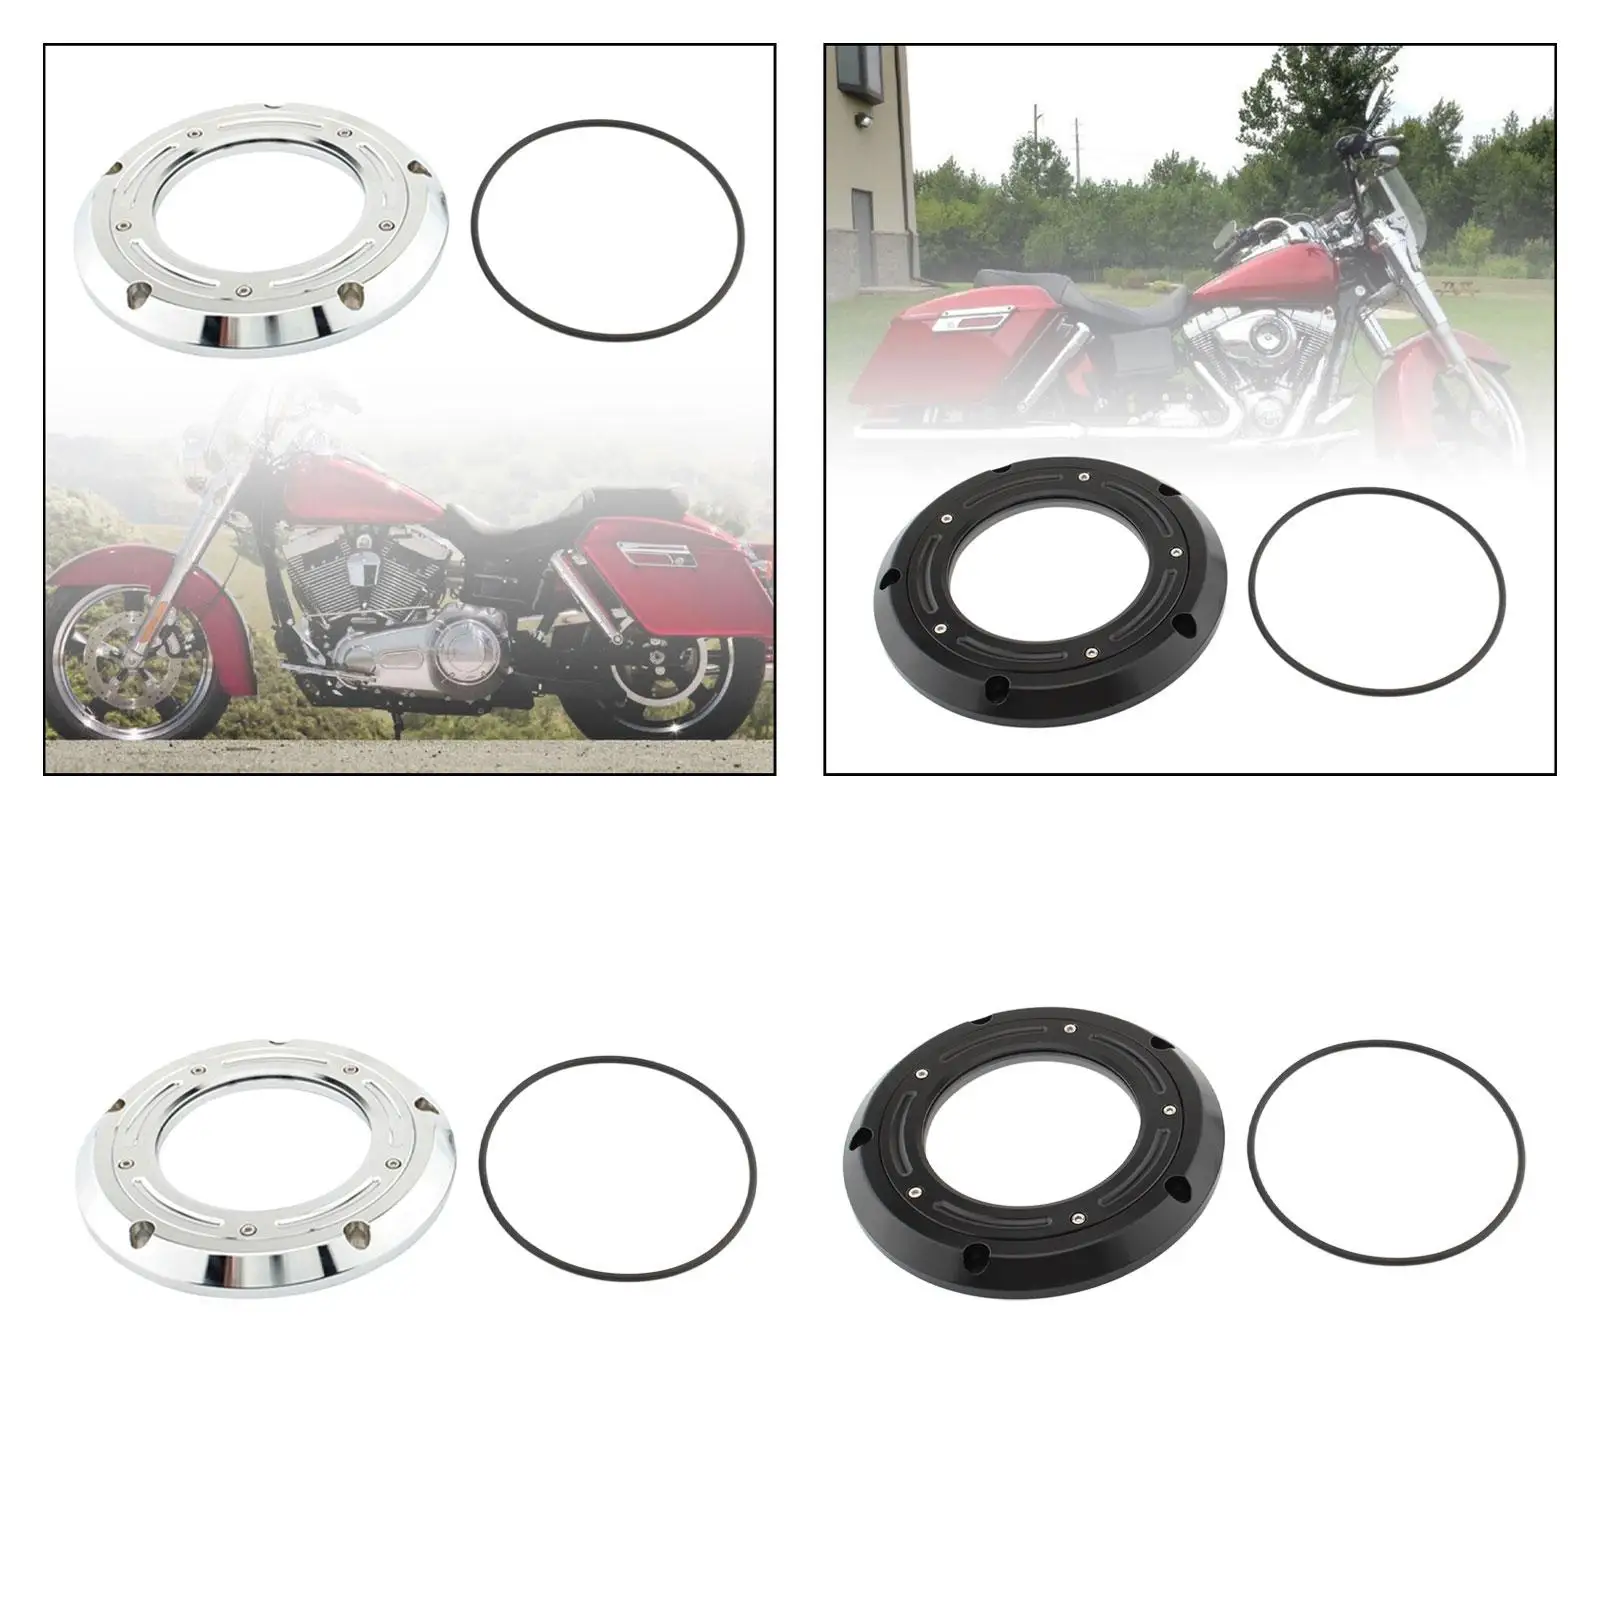 Motorcycle Clutch Derby Cover Replacement Parts Supplies for Fld Dyna Switchback Flhrs Custom Flstf Fat Boy Flhr